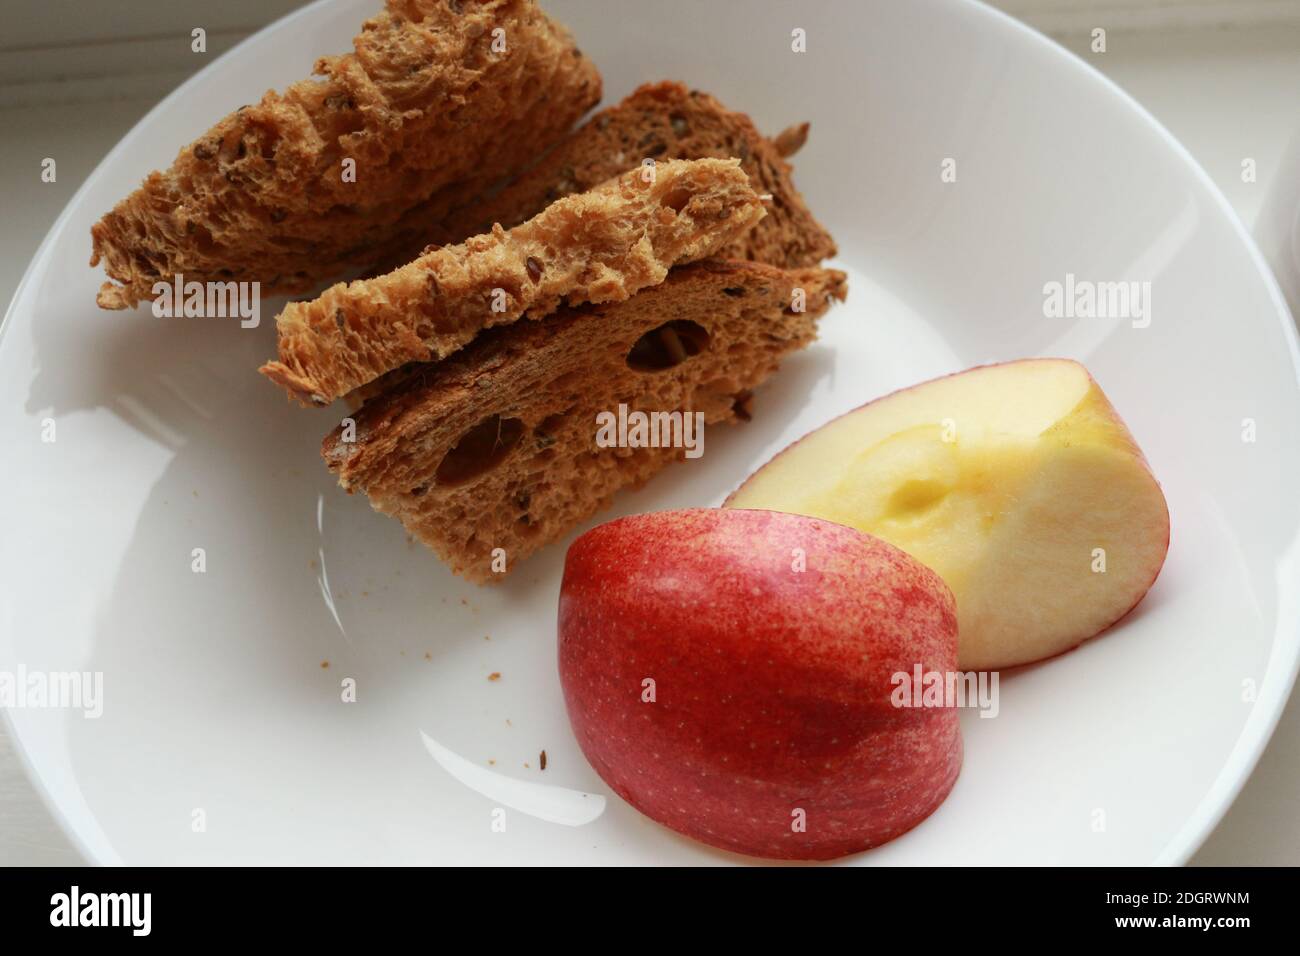 Low glycaemic index Breakfast Brown Bread with slice of apples on white plate Stock Photo